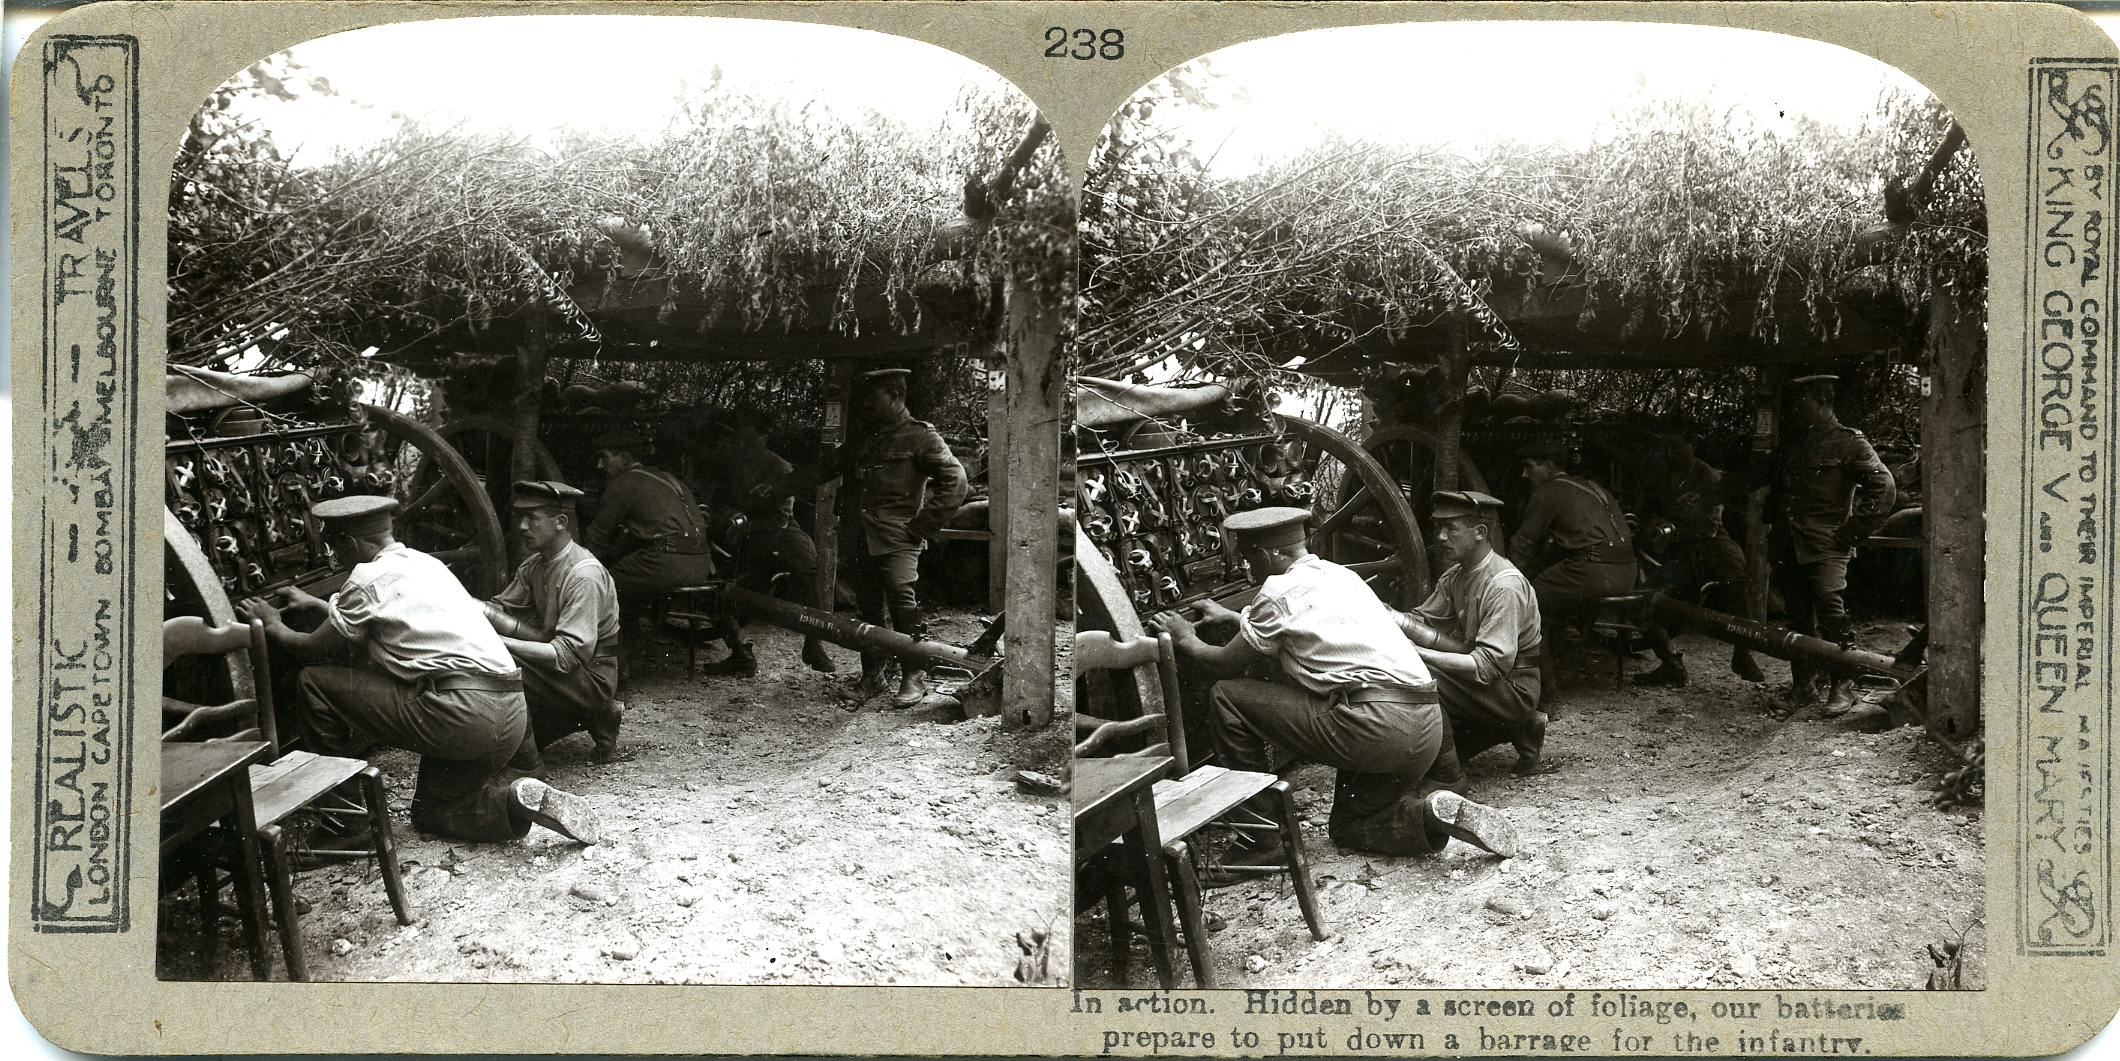 In action. Hidden by a screen of foliage, our batteries prepare to put down a barrage for the infantry